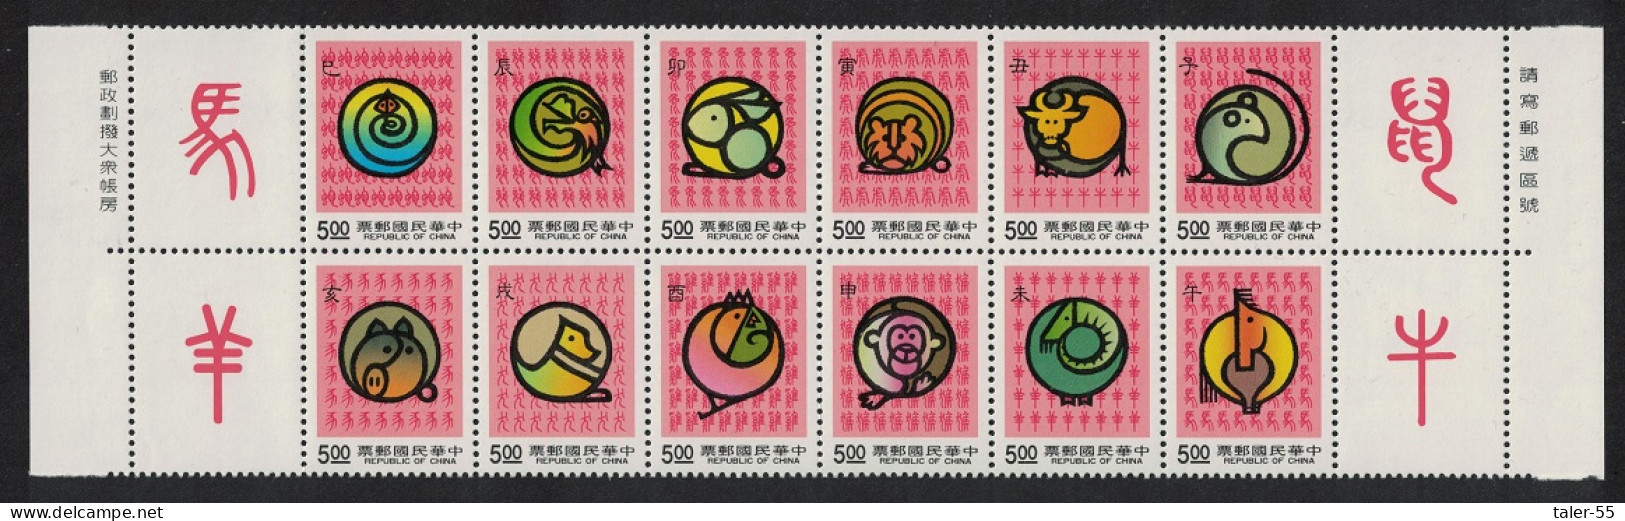 Taiwan Signs Of Chinese Zodiac UNFOLDED Block Of 12 Margins 1992 MNH SG#2038-2049 - Neufs